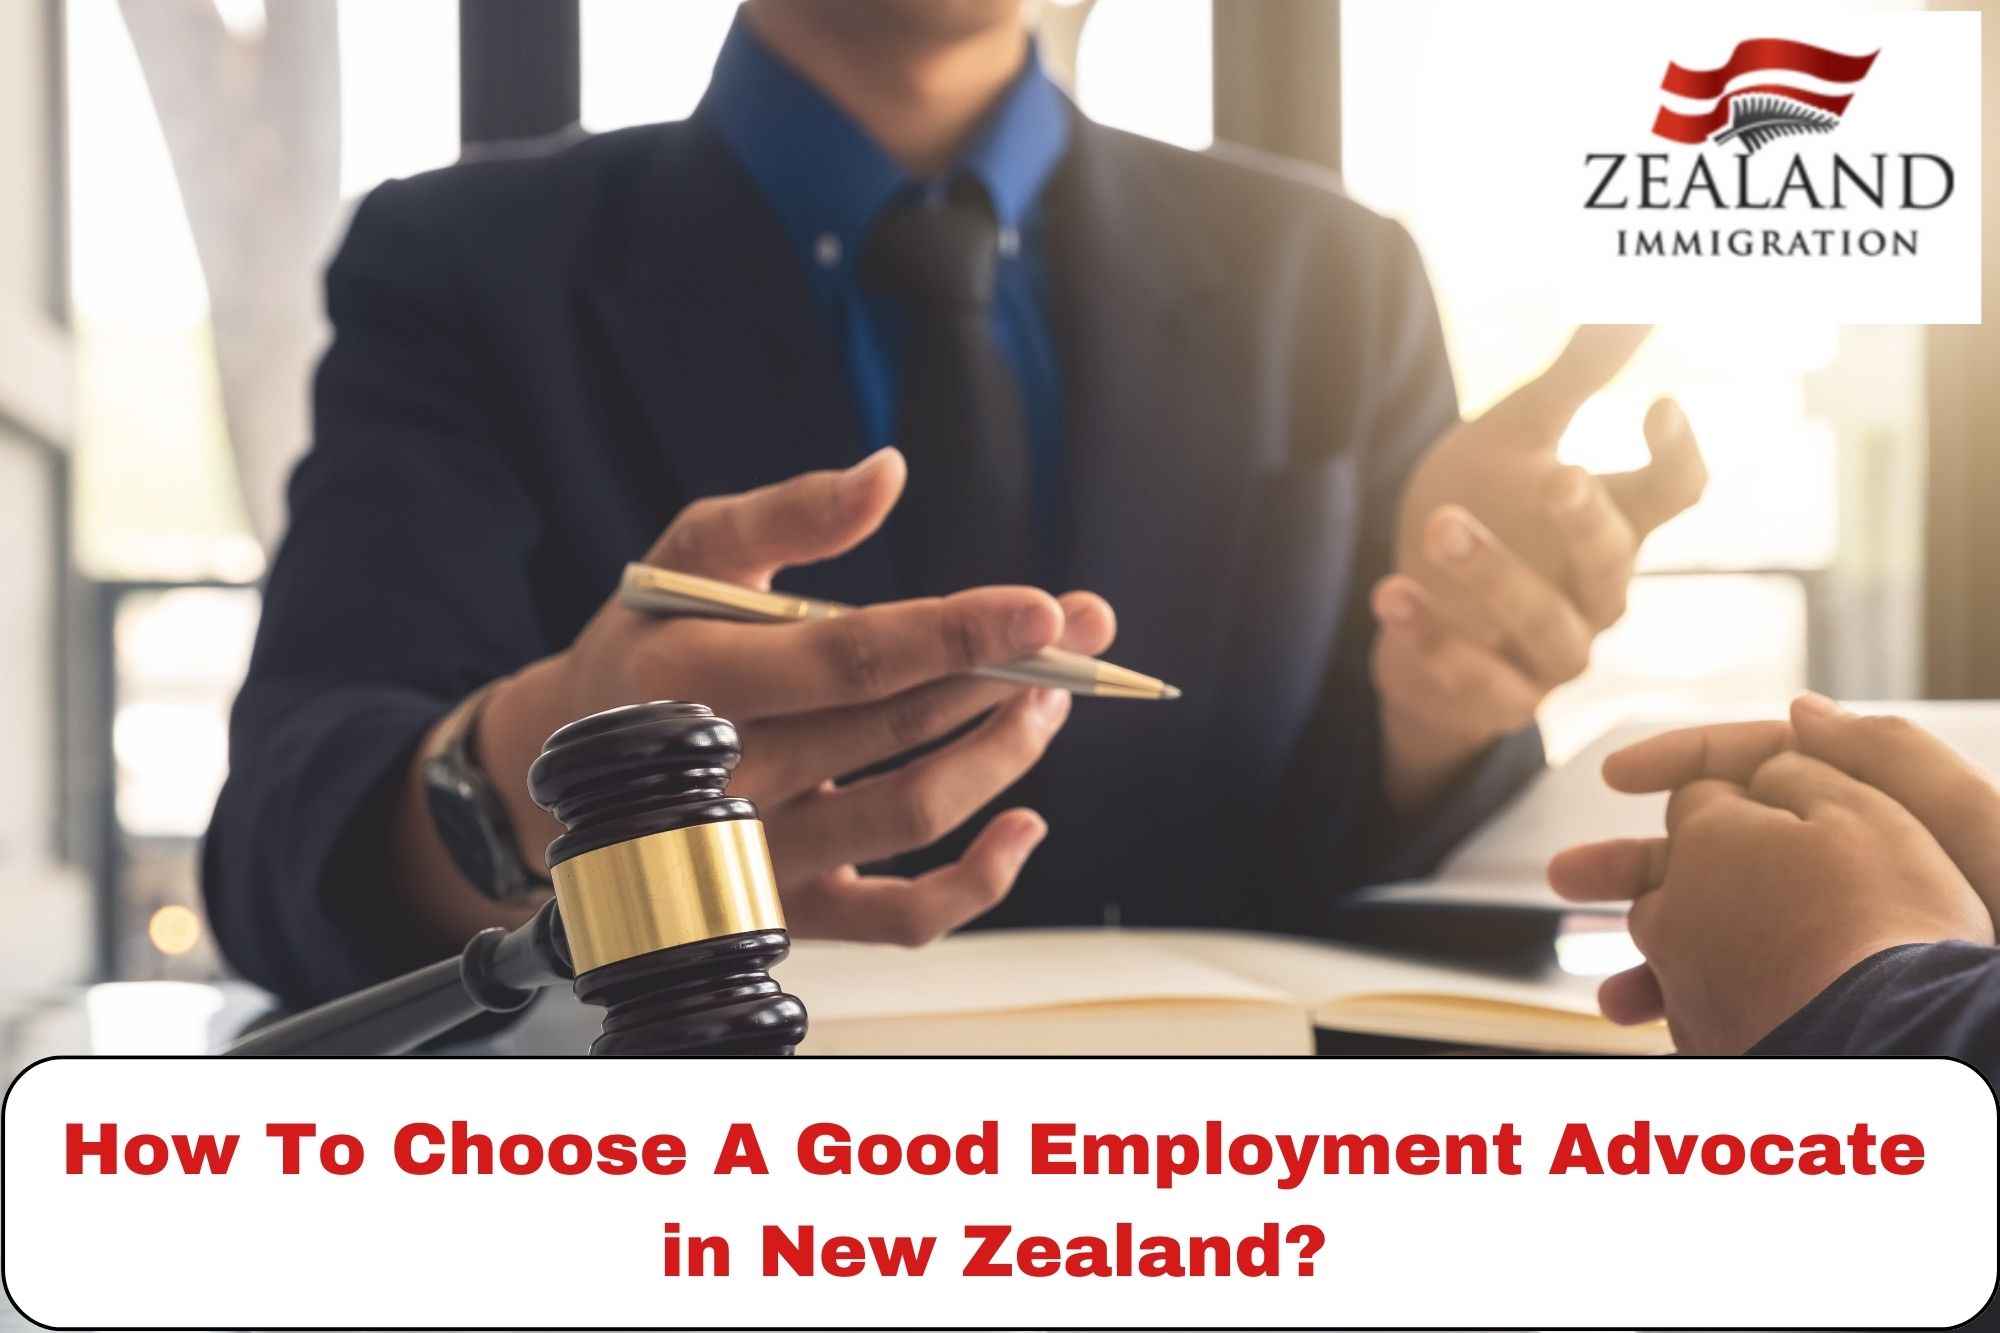 How To Choose A Good Employment Advocate in New Zealand?